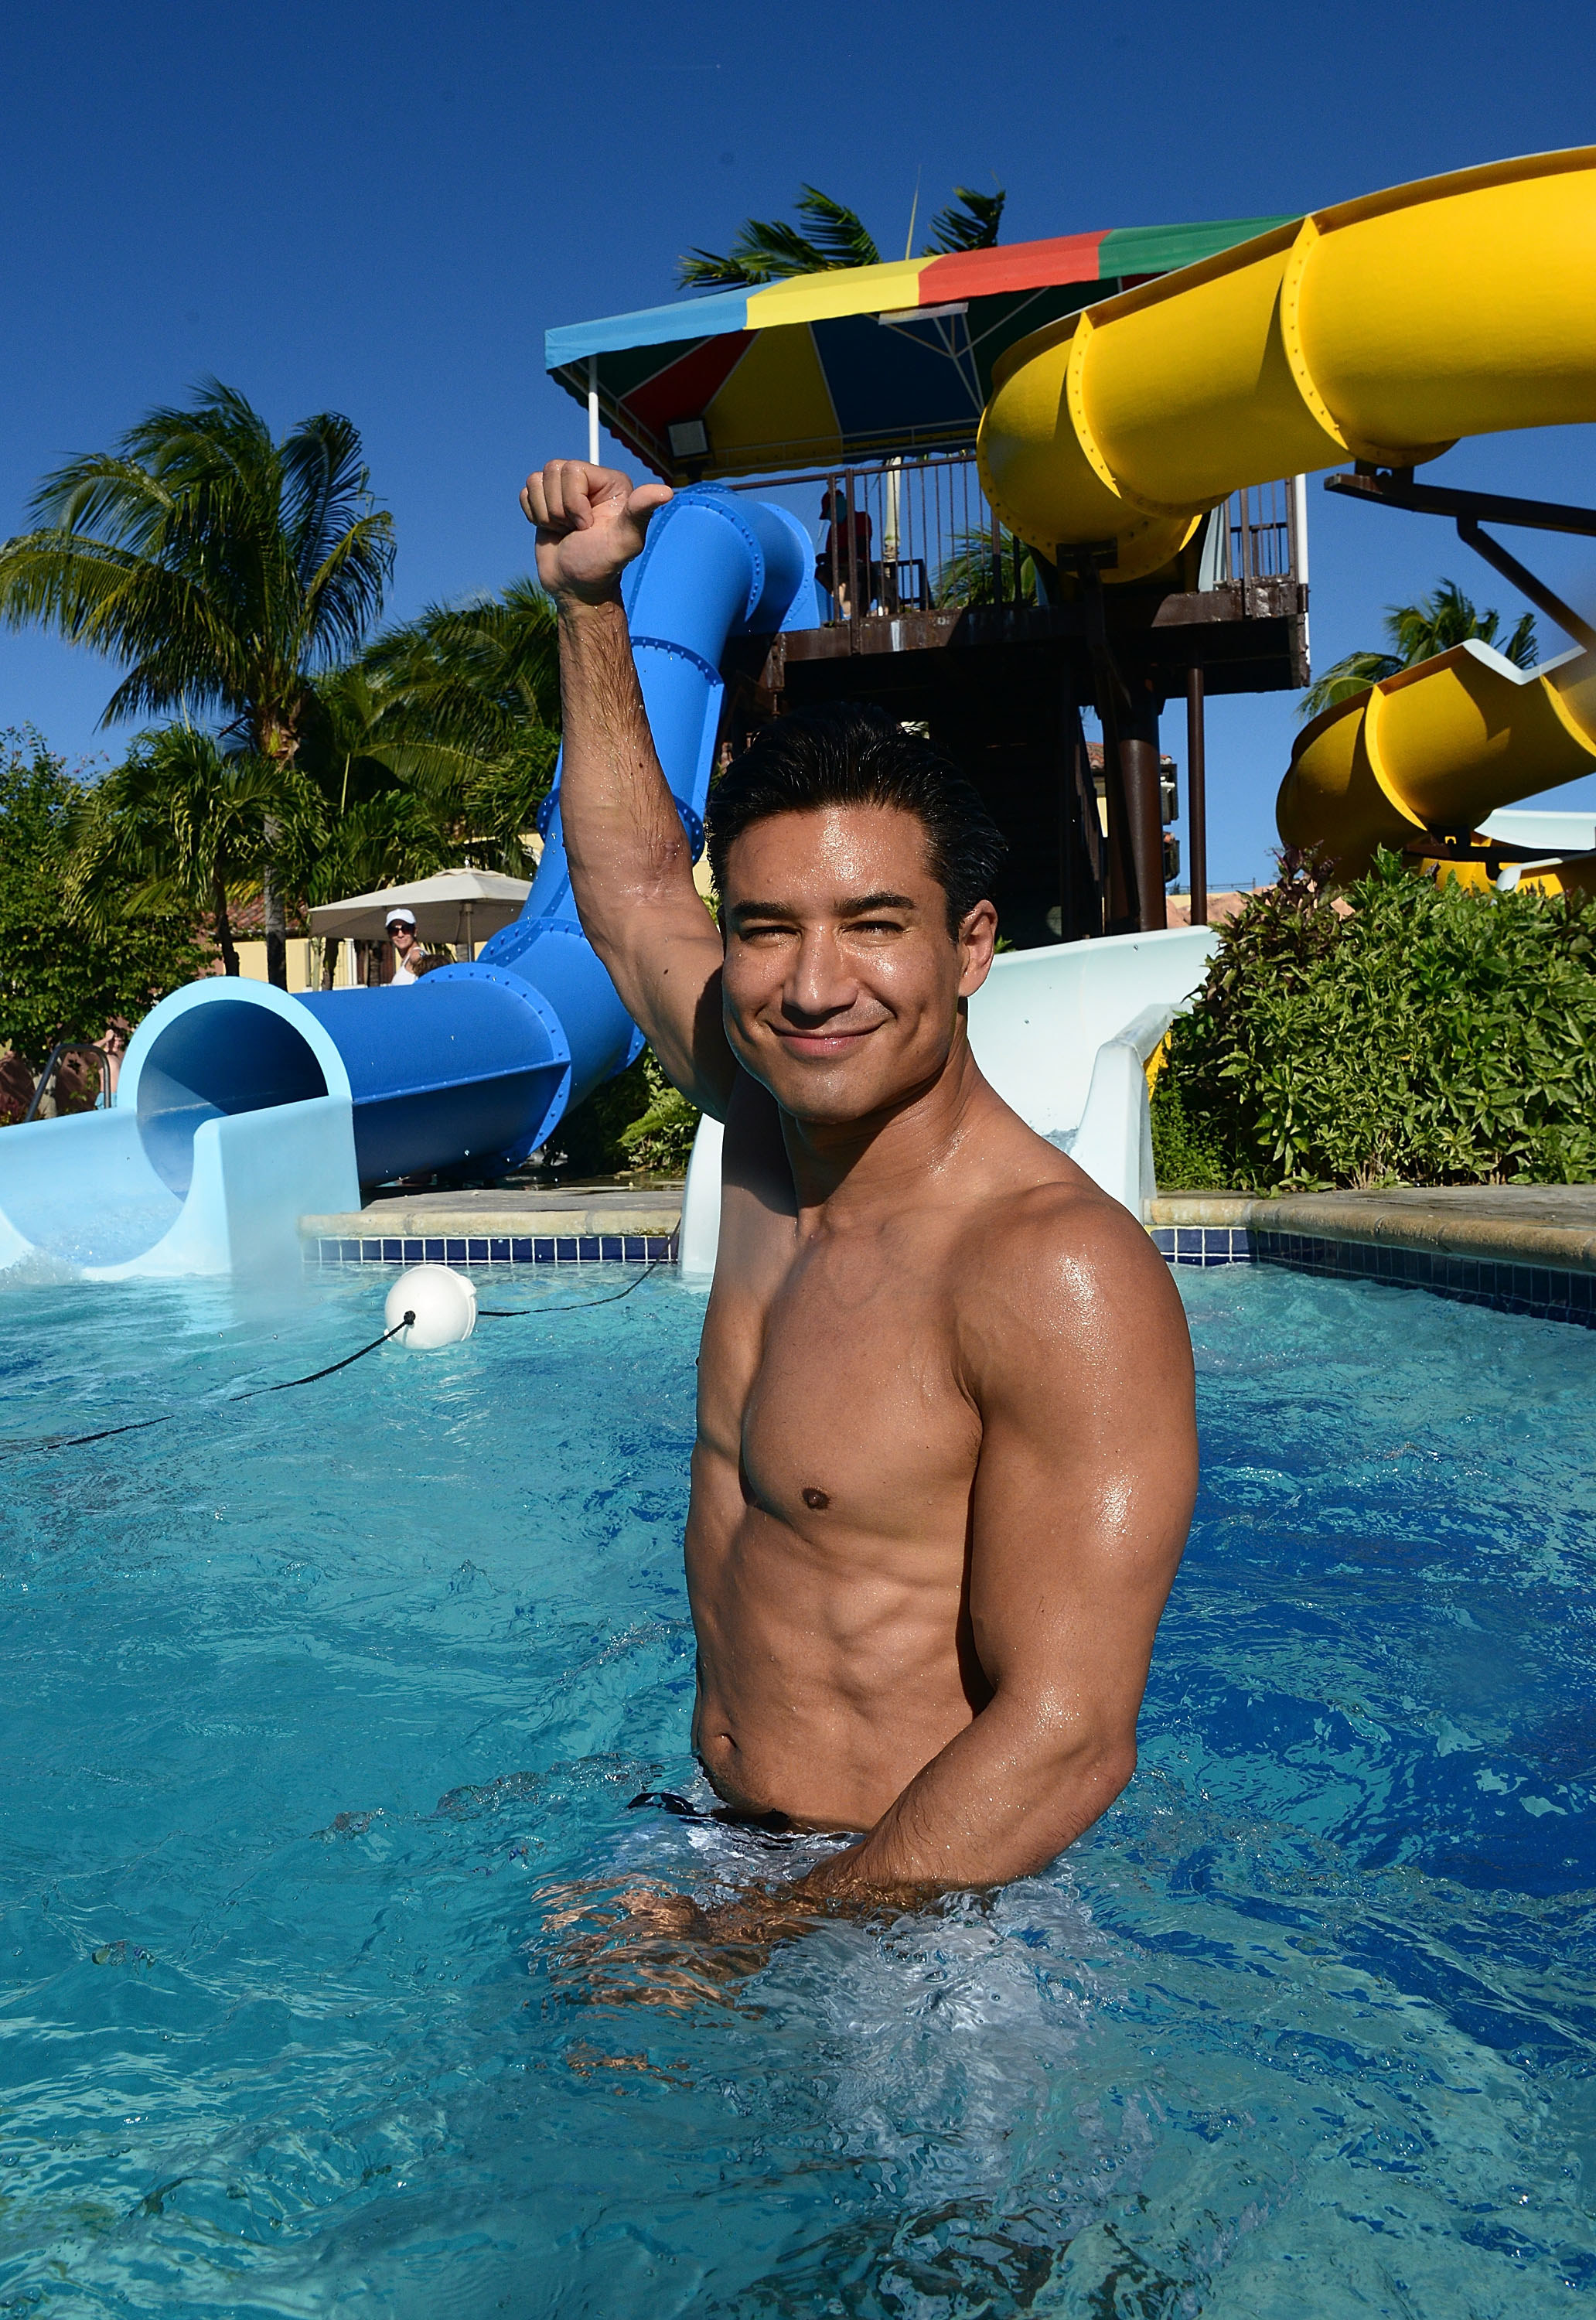 Mario shirtless in a pool